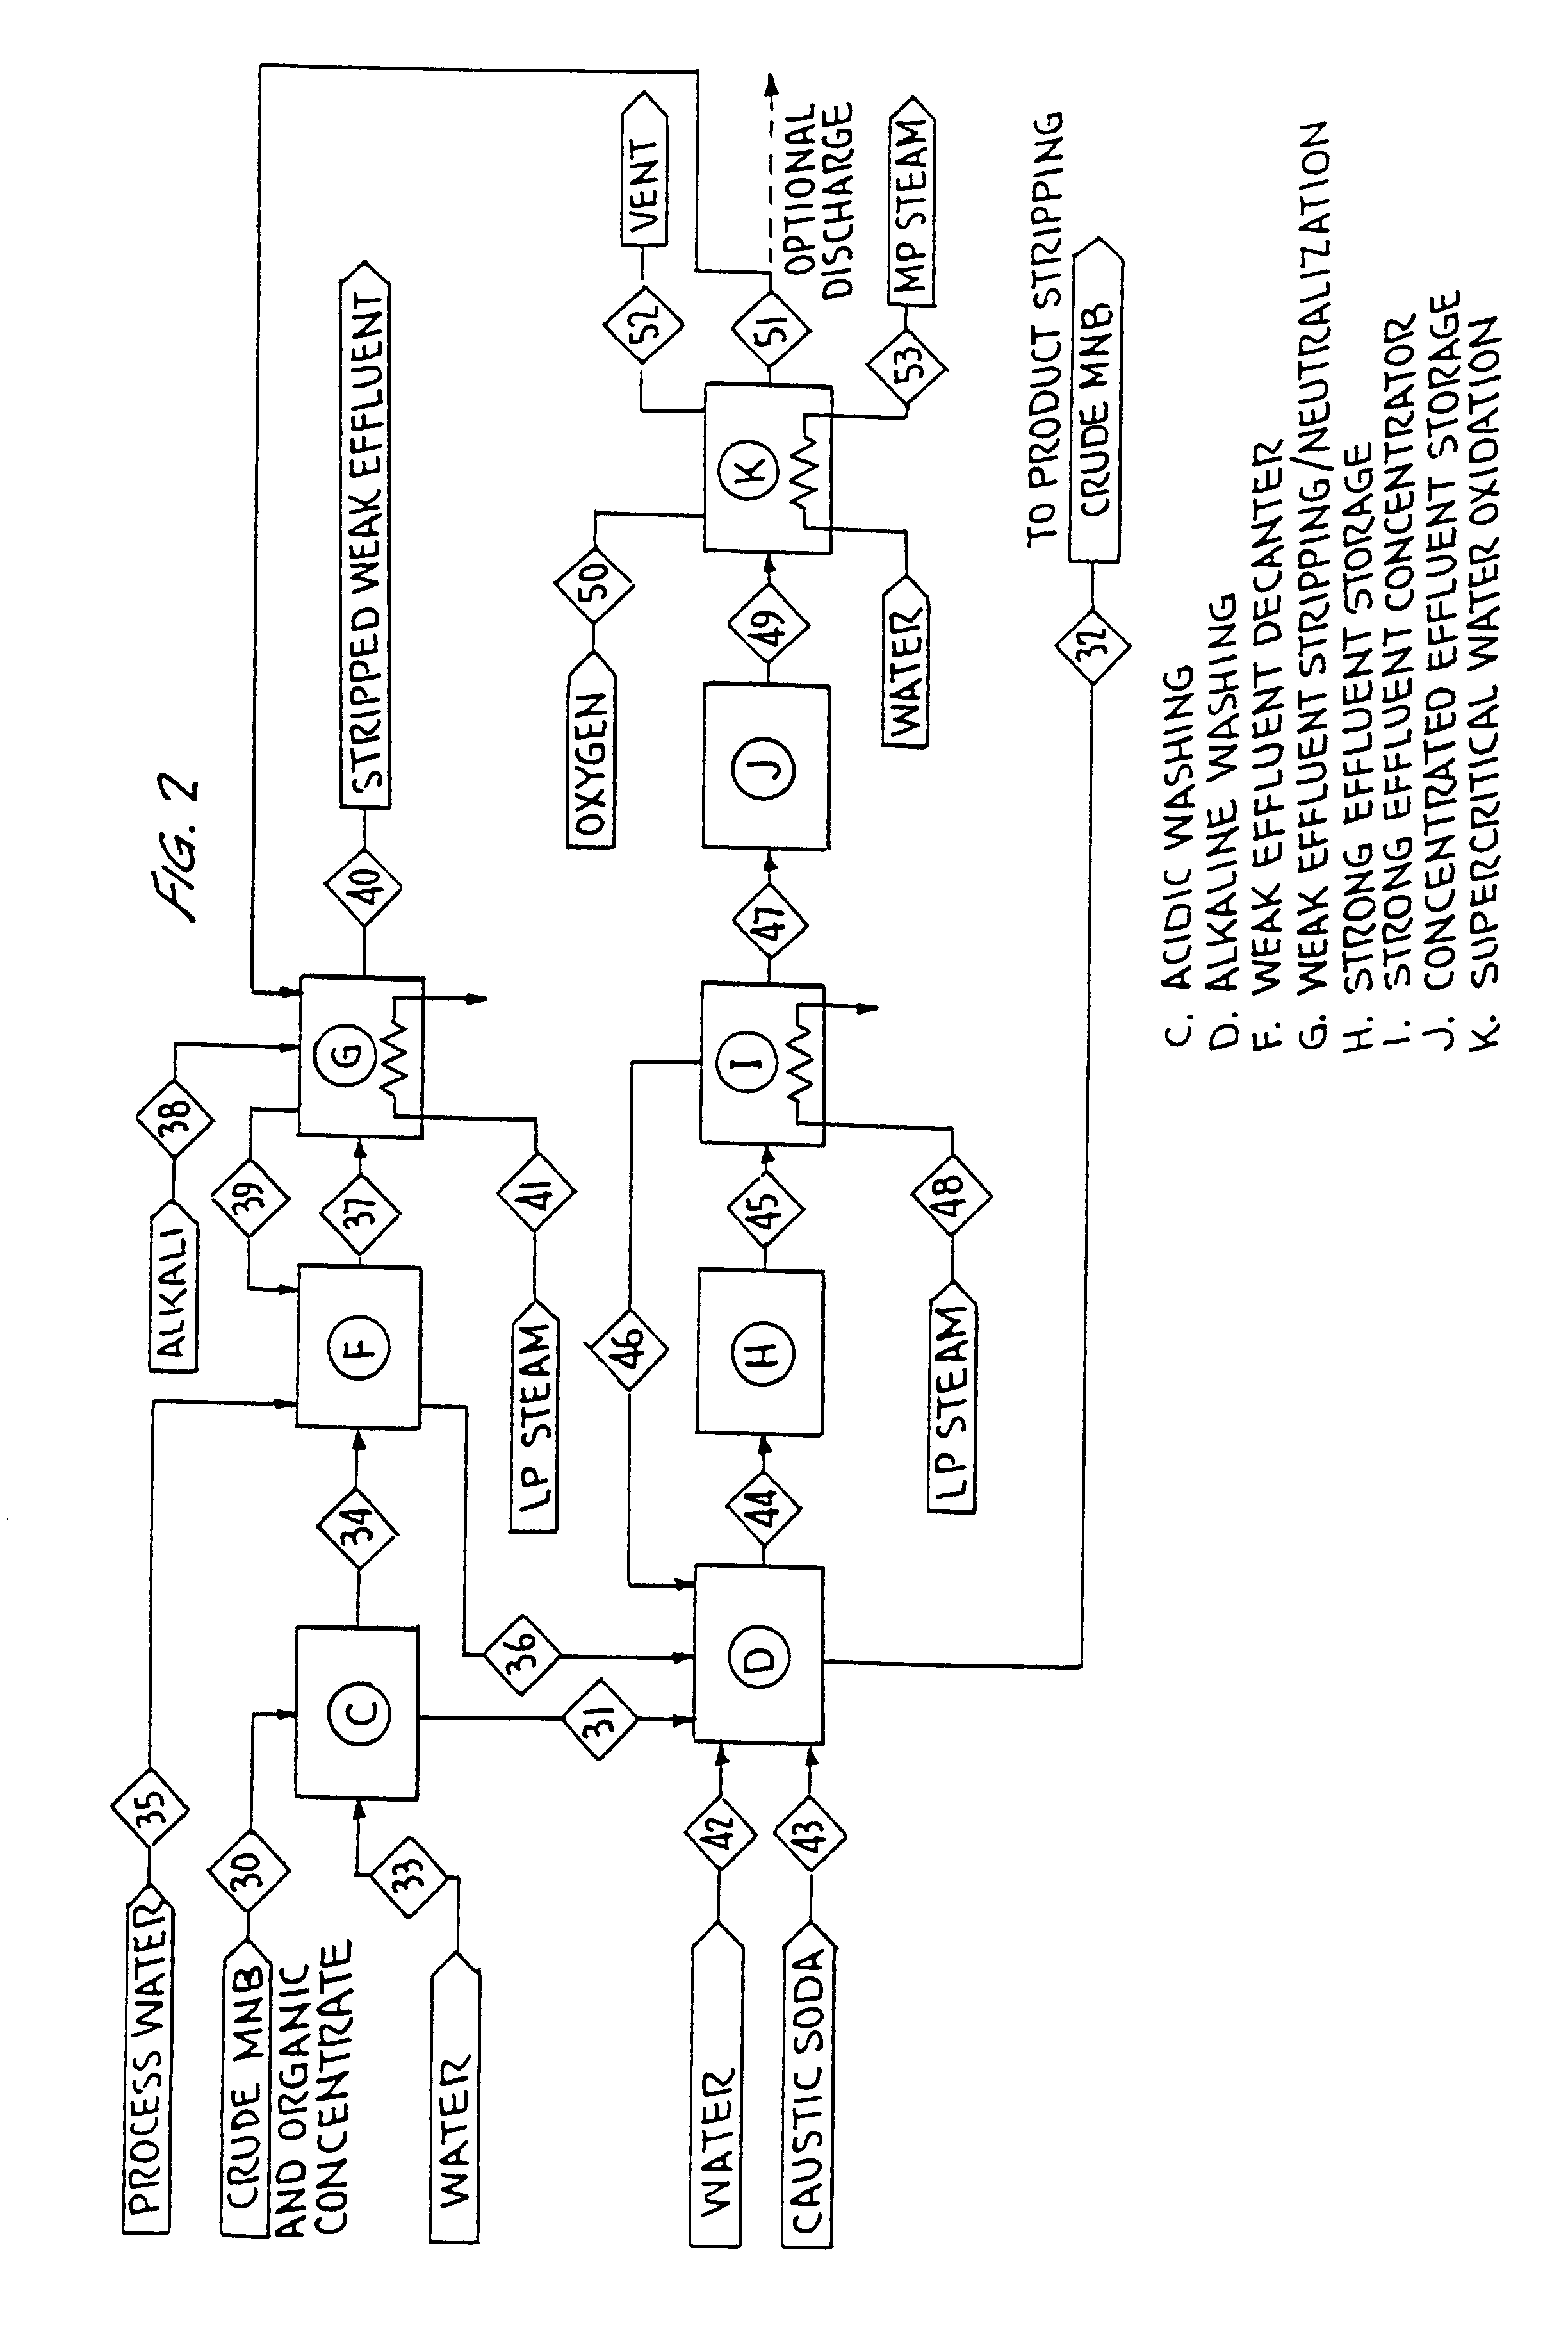 Integrated effluent treatment process for nitroaromatic manufacture